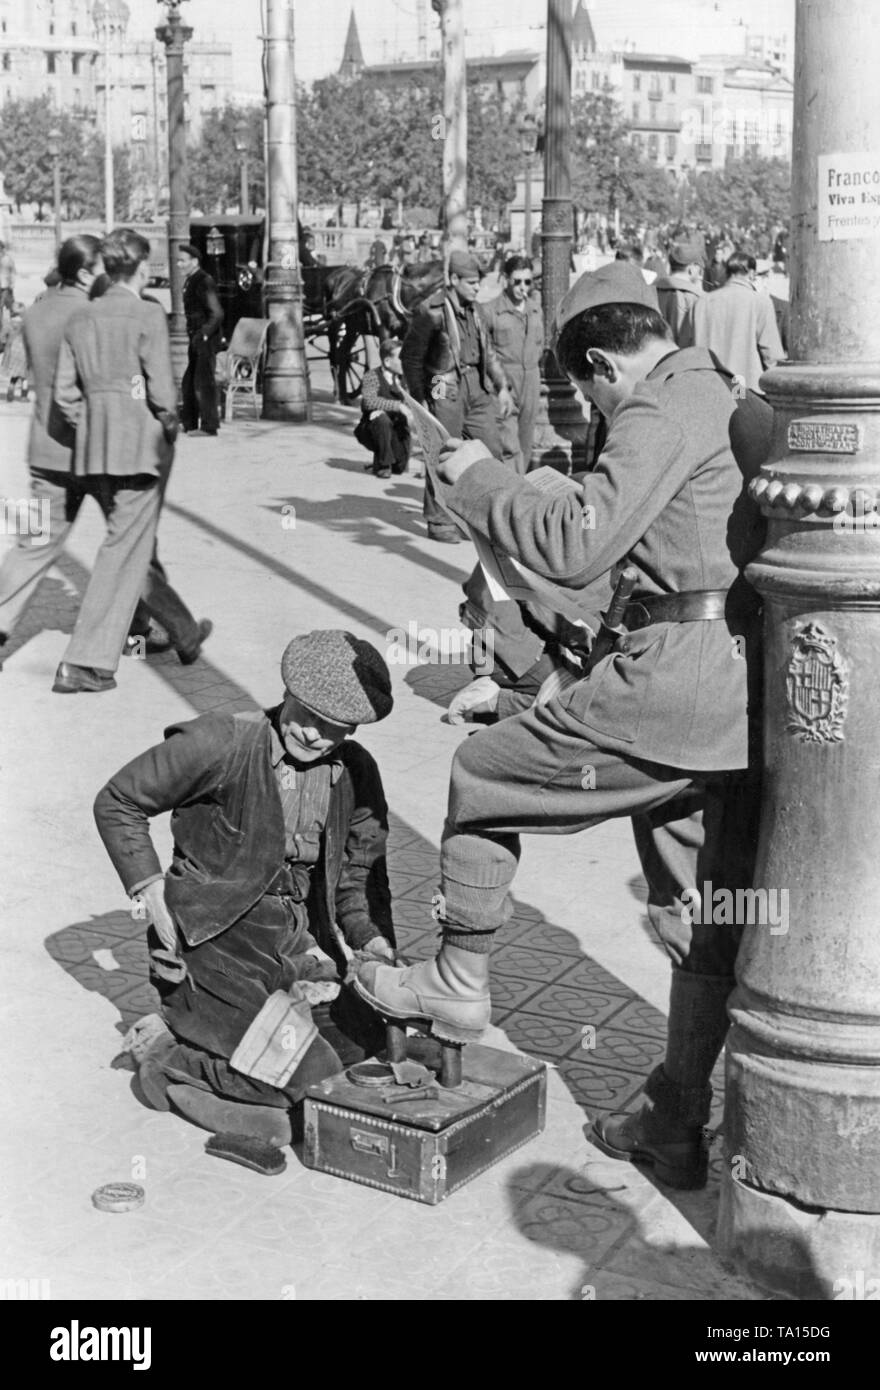 A Spanish national soldier lets a man clean his shoes, while he is reading a newspaper, in front of a lantern on the Rambla (promenade in the center) in Barcelona, ??Catalonia, Spain in March 1939, after the conquest of Barcelona by General Francisco Franco in January, 1939. In the background, flaneurs and soldiers. On the lantern, a call of Franco to the inhabitants of Barcelona. Down below on the cast-iron lantern,  the coat of arms of Barcelona. Stock Photo